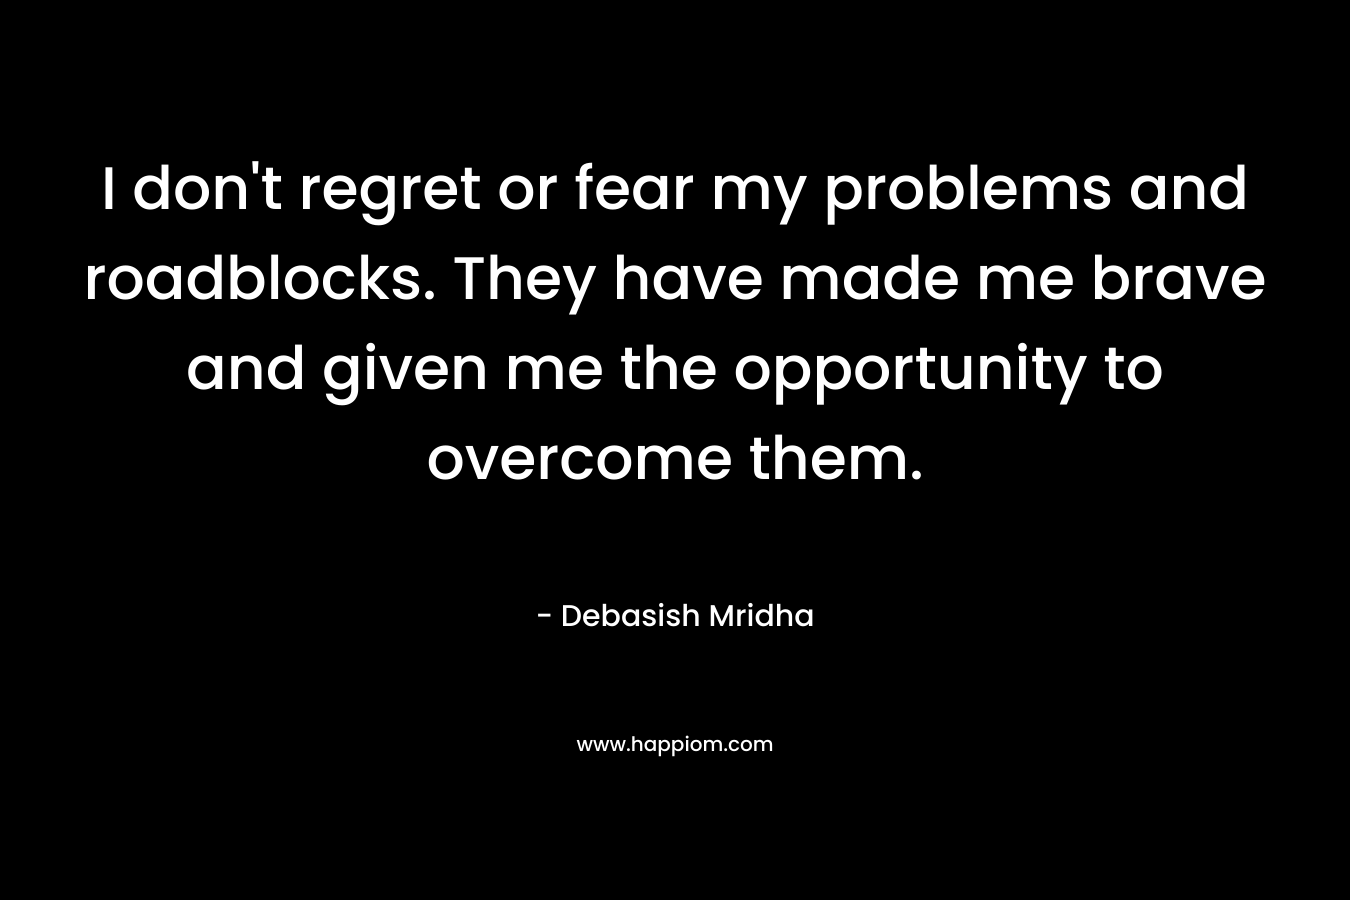 I don't regret or fear my problems and roadblocks. They have made me brave and given me the opportunity to overcome them.